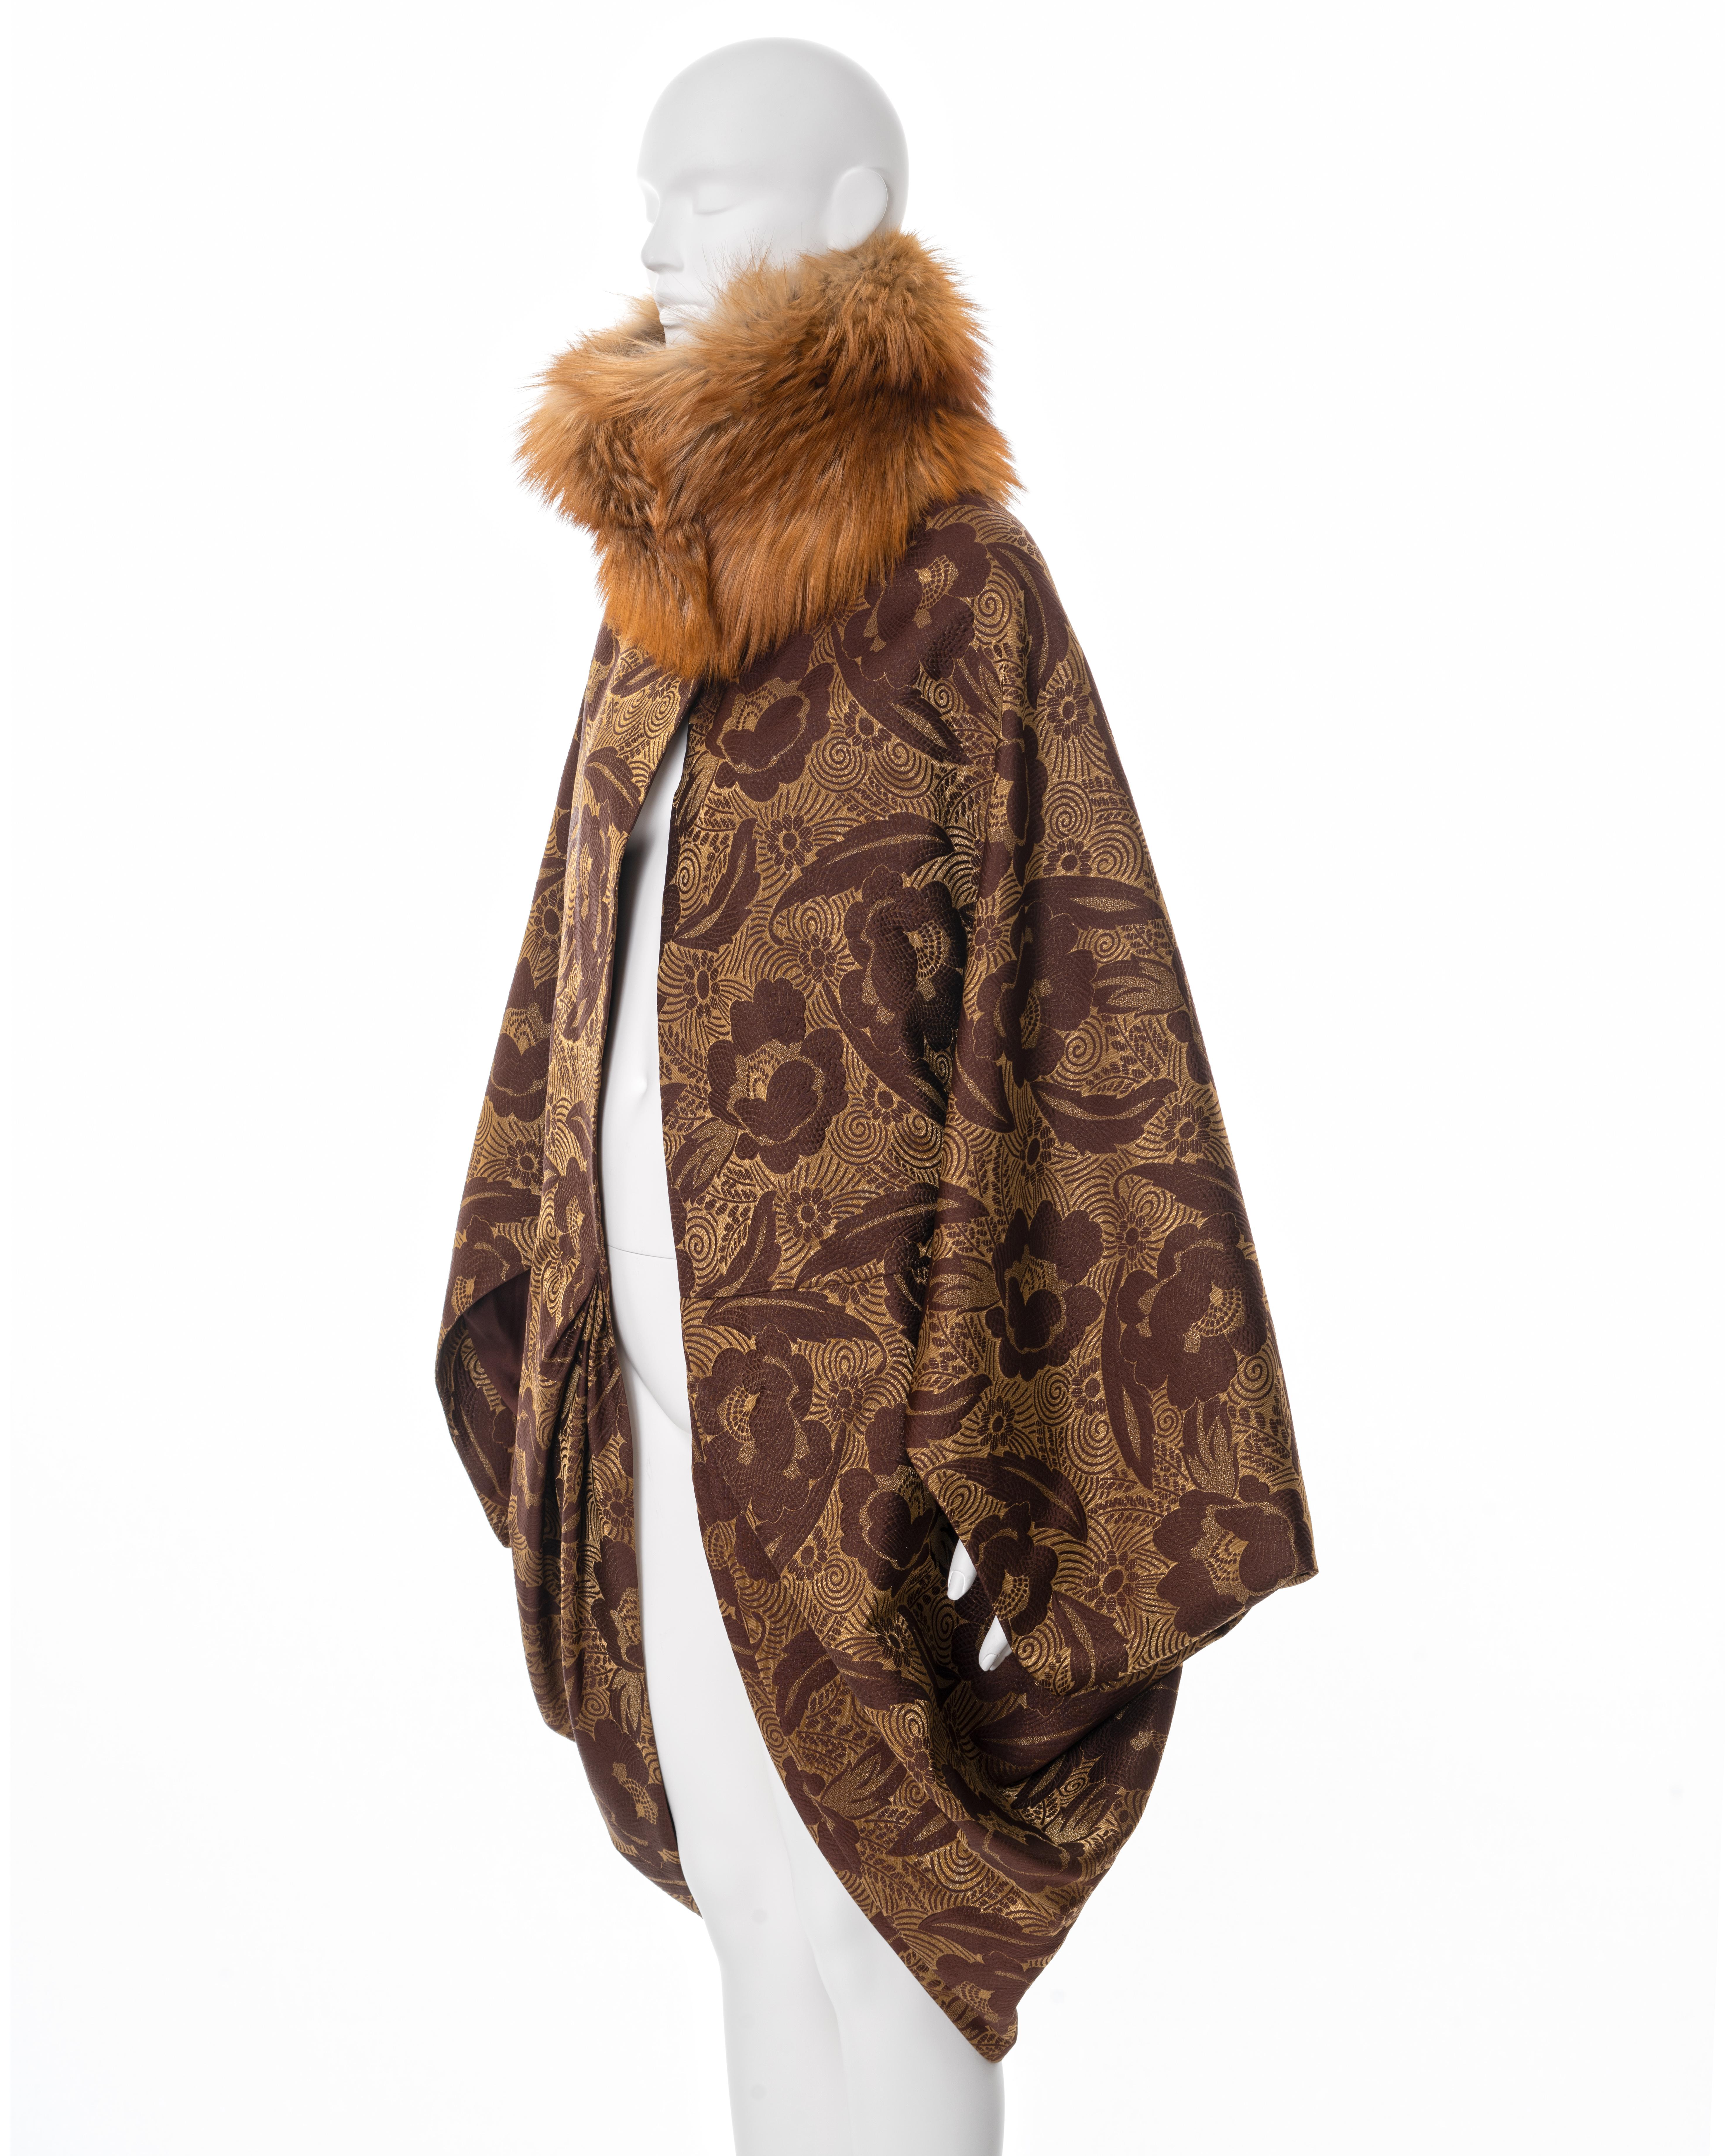 Christian Dior by John Galliano silk cocoon coat with fox fur collar, ss 2008 For Sale 5